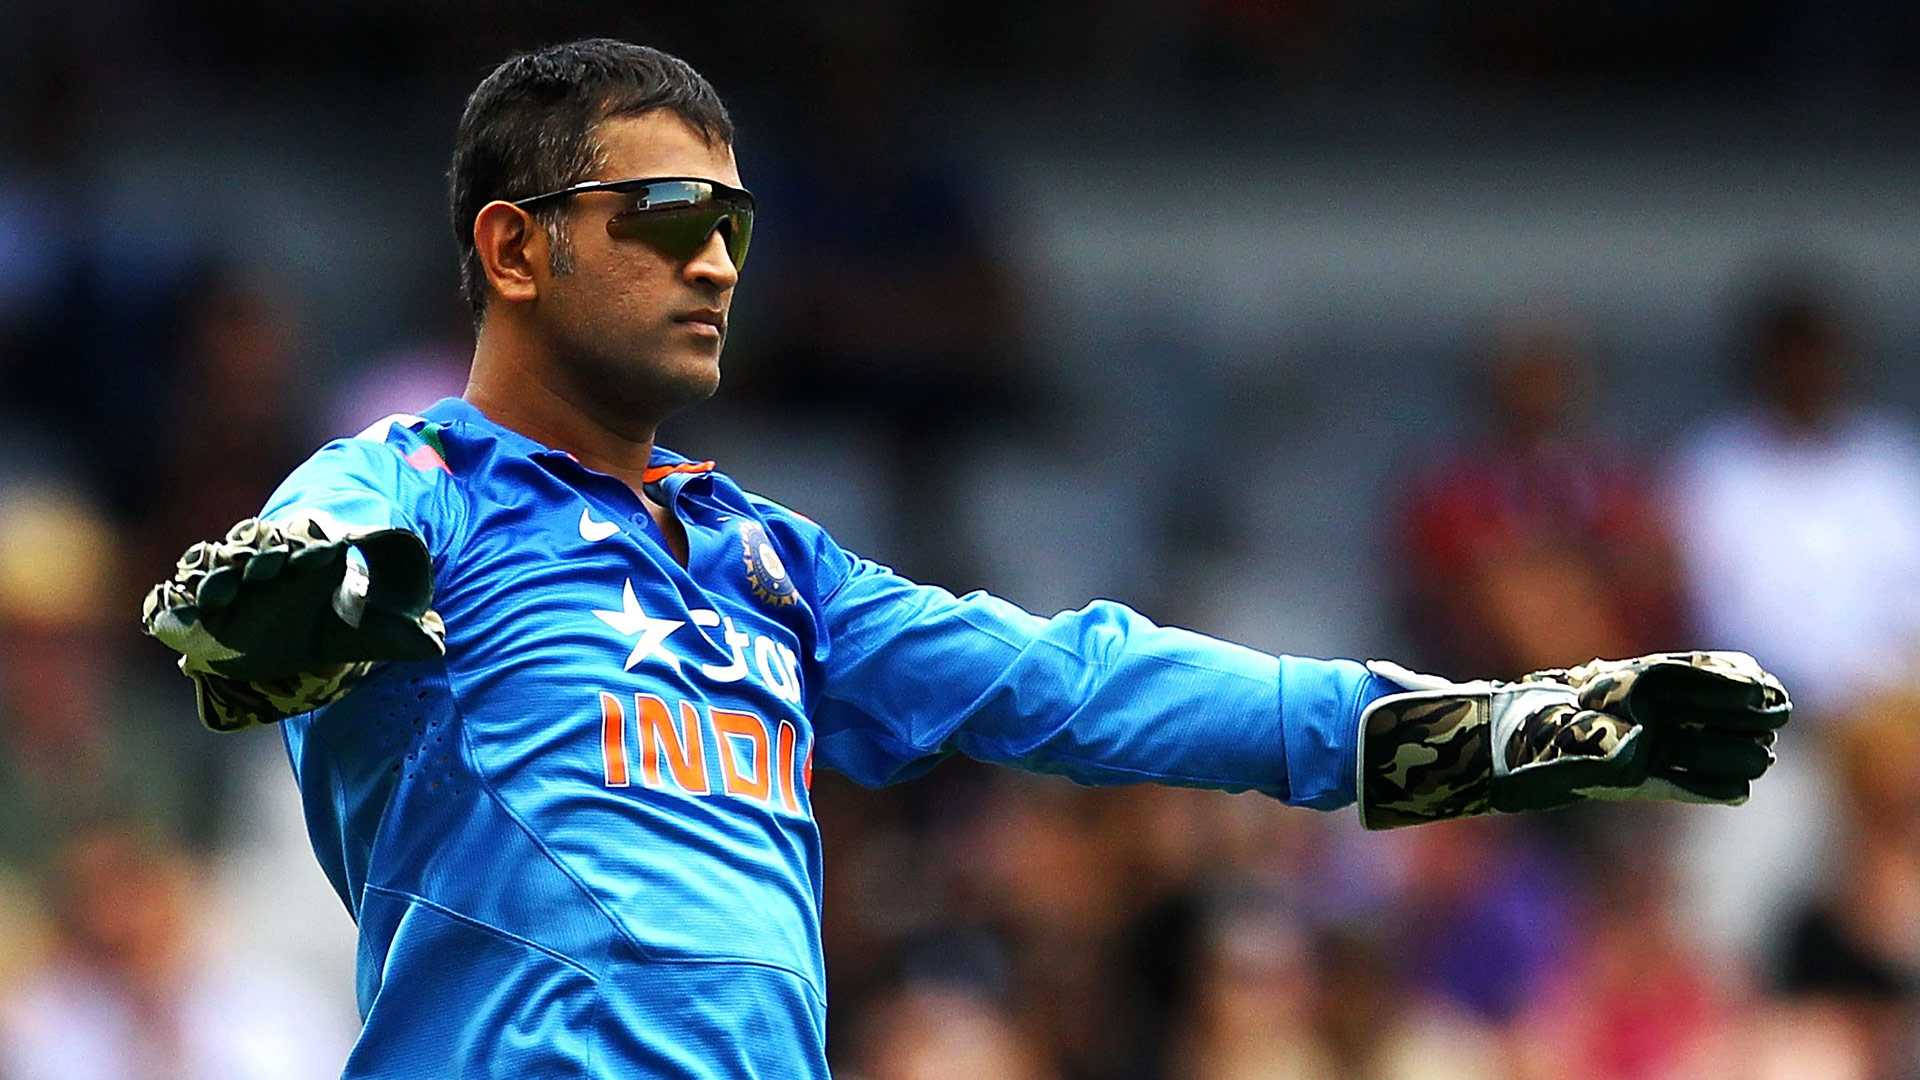 Ms Dhoni Camouflage Print Gloves Background